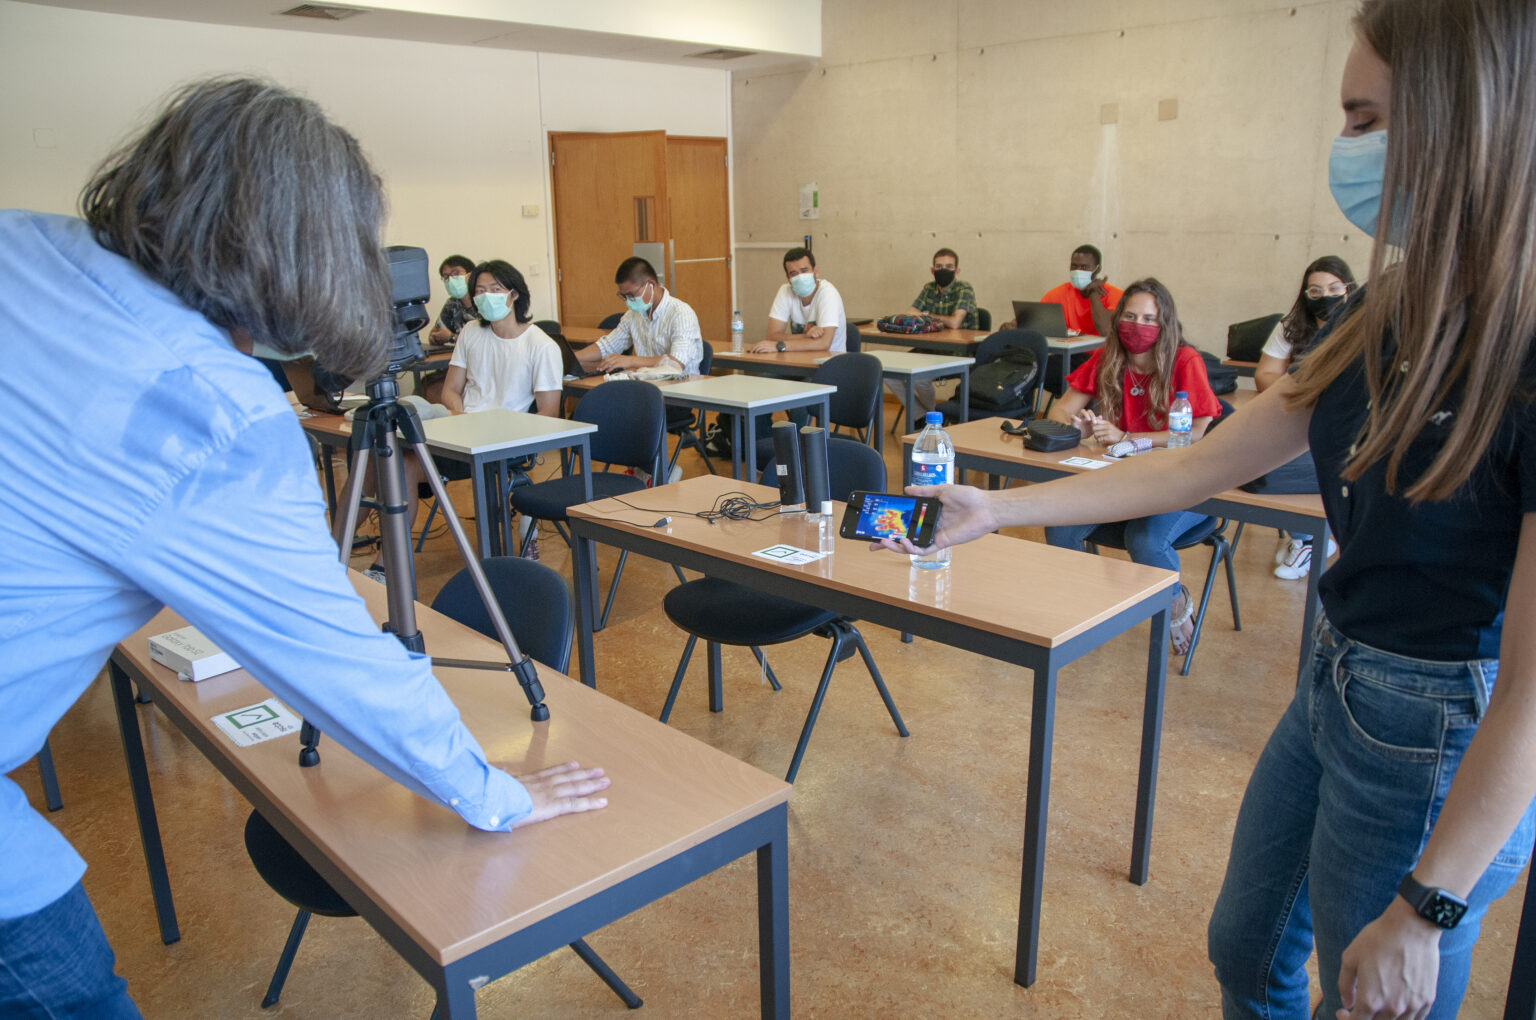 SmartLife Summer School 2020, SmartLife – Smart Sensing and Systems for Everyday Life”  took place at Iscte and  Instituto de Telecomunicações-IUL. from the 27th of july till the 30th of october 2020.ThermographyTests and Stress PhysiologyOctavian Postolache,VítorViegas, Filipa Prudêncio, Mariana Jacob Rodrigues.Fotografia de Hugo Alexandre Cruz.